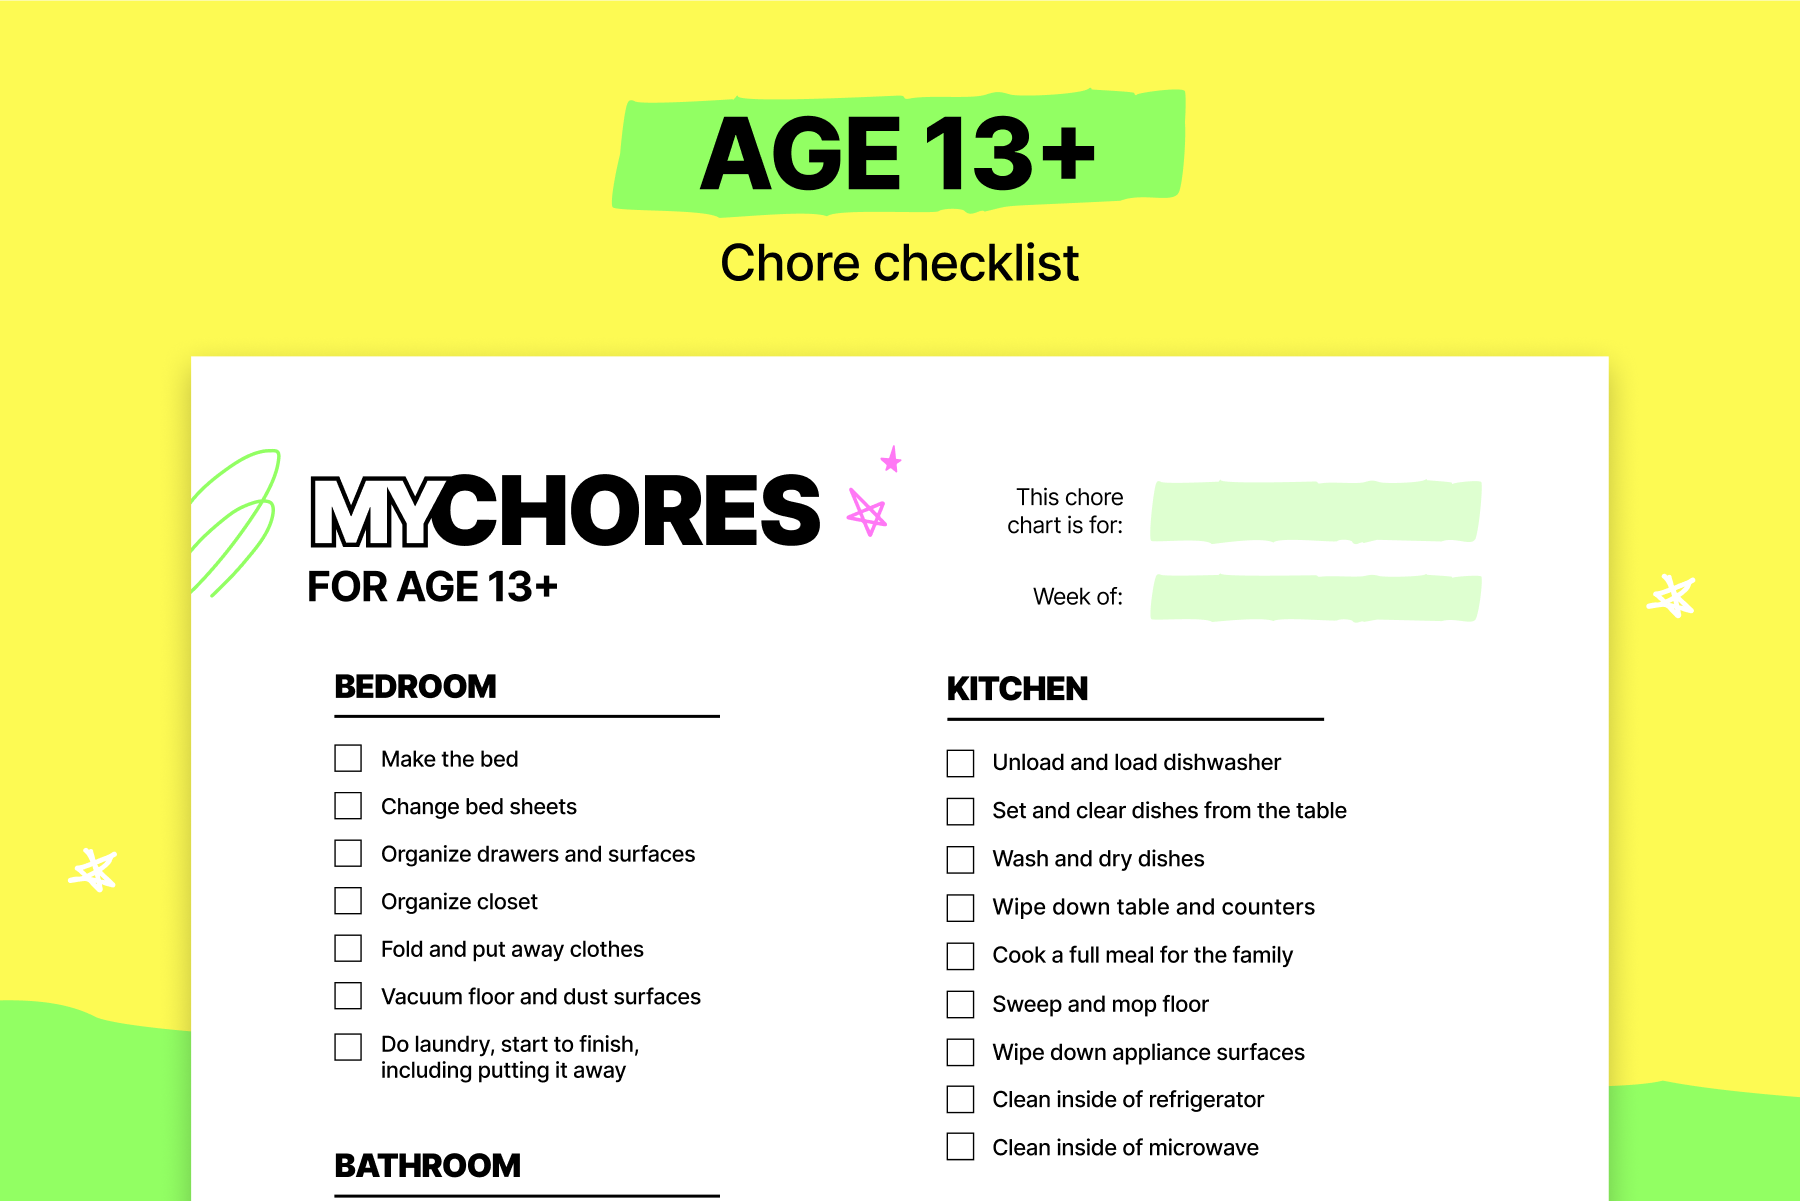 A chore chart checklist for 13 to 18 year olds